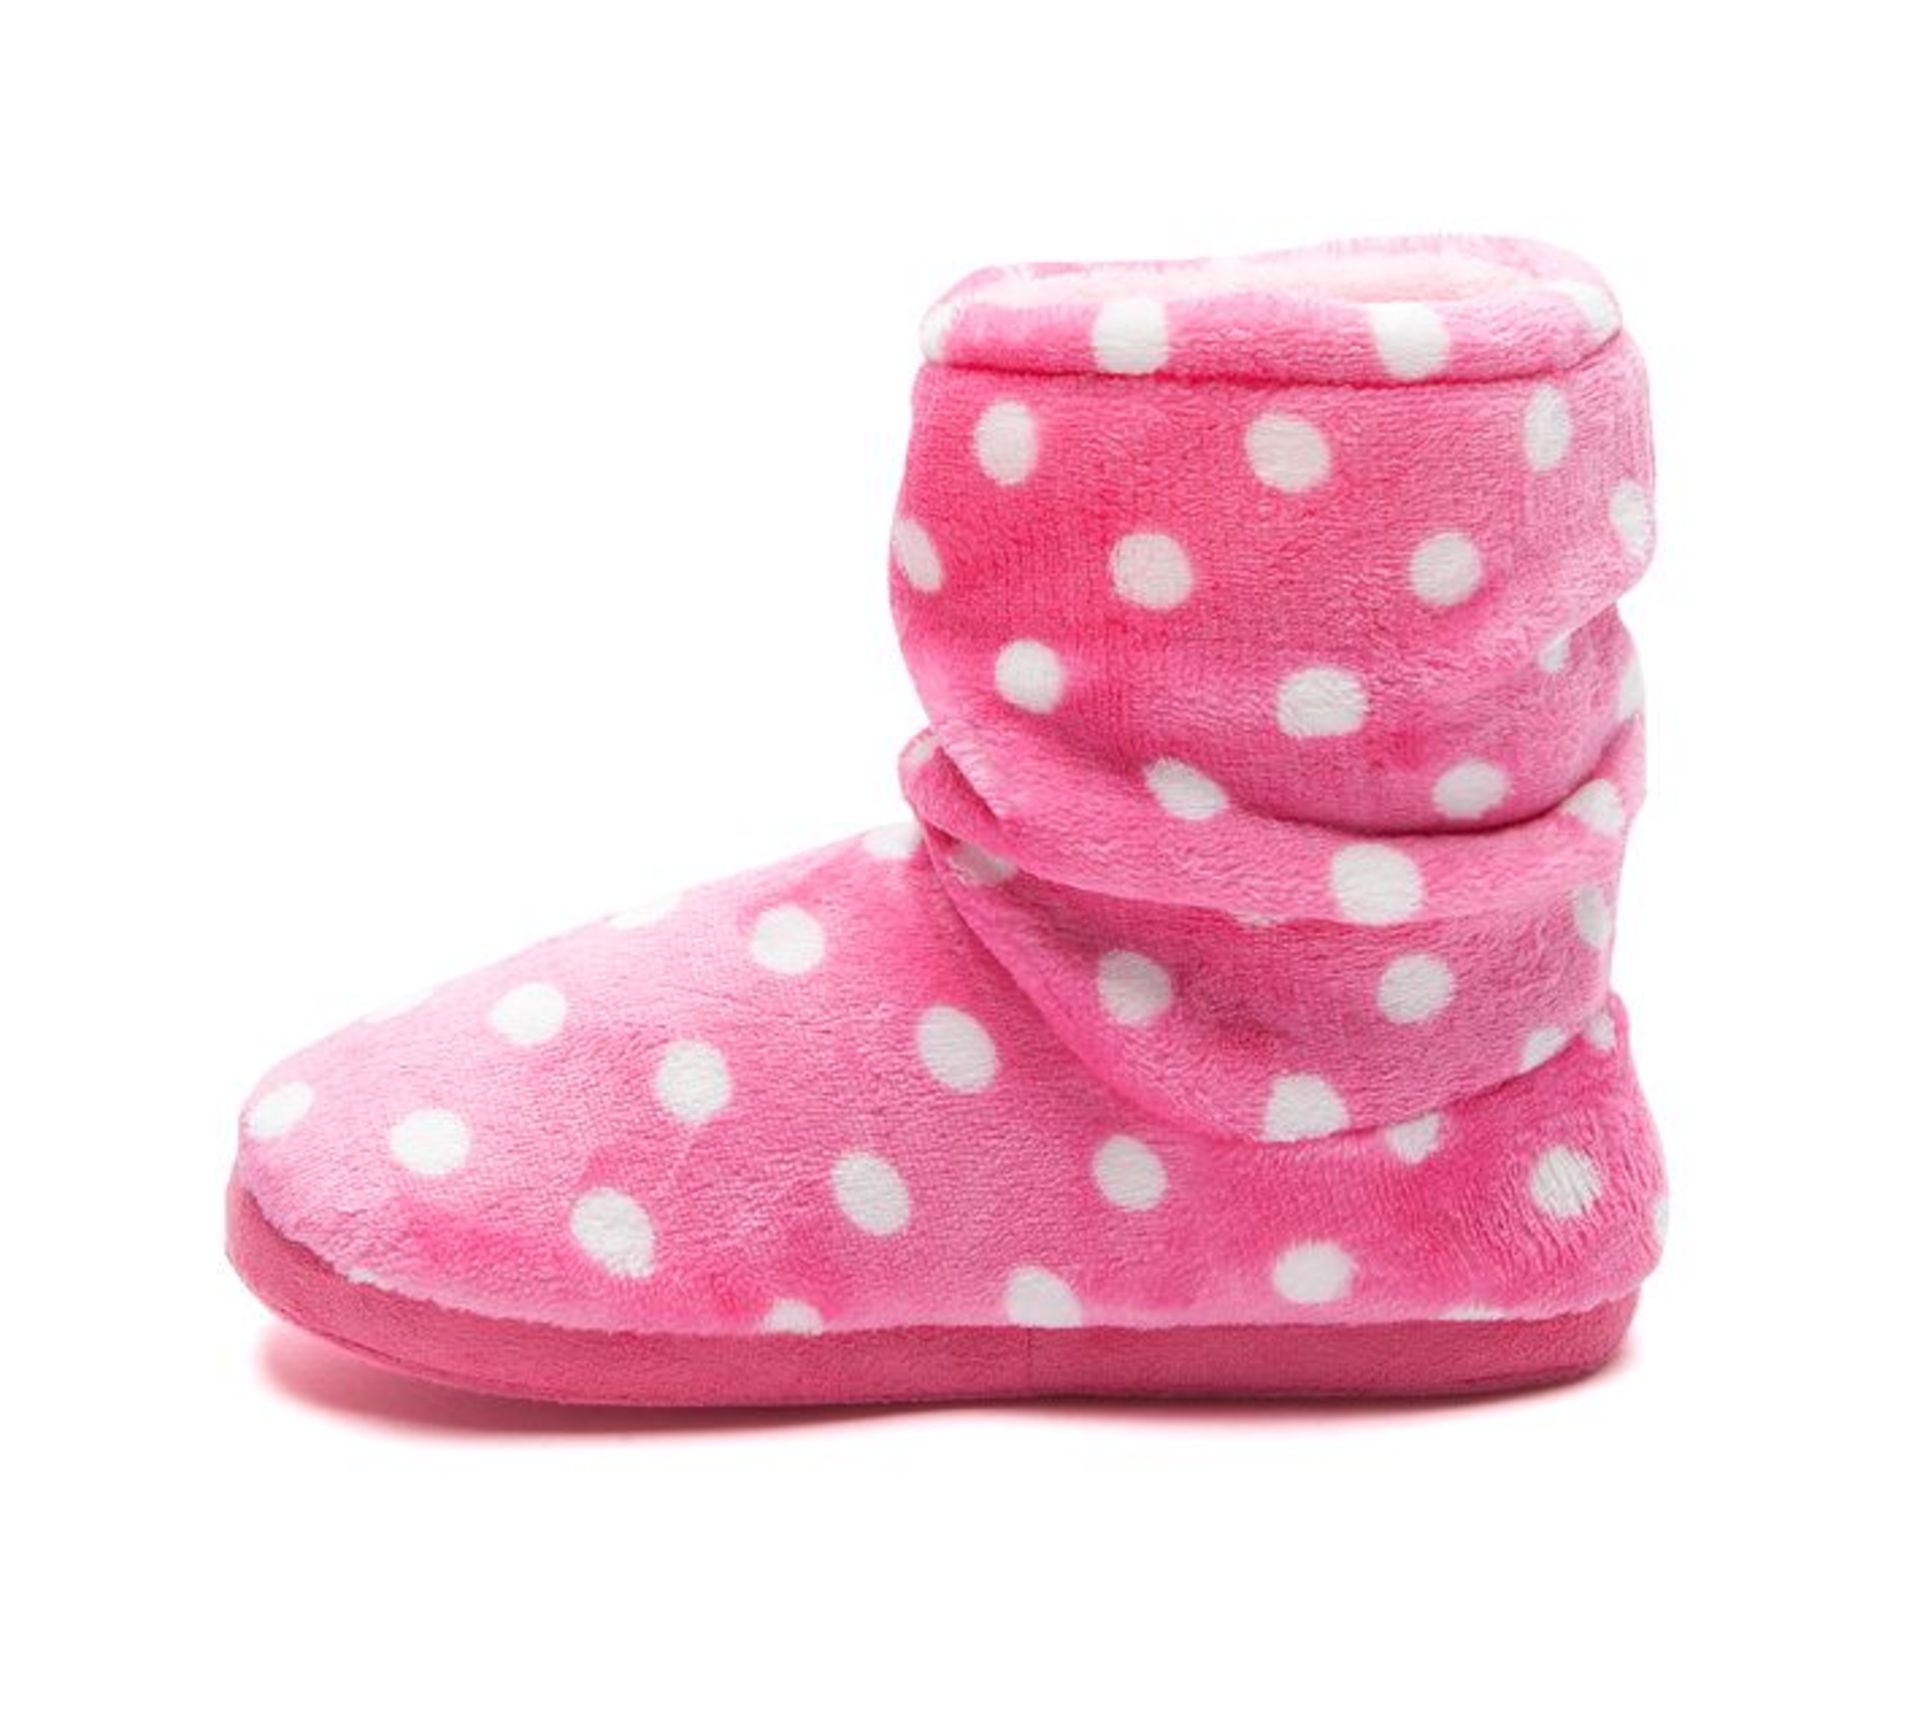 V Brand New Four Pairs Of Pink Polka Dot Slipper Boots